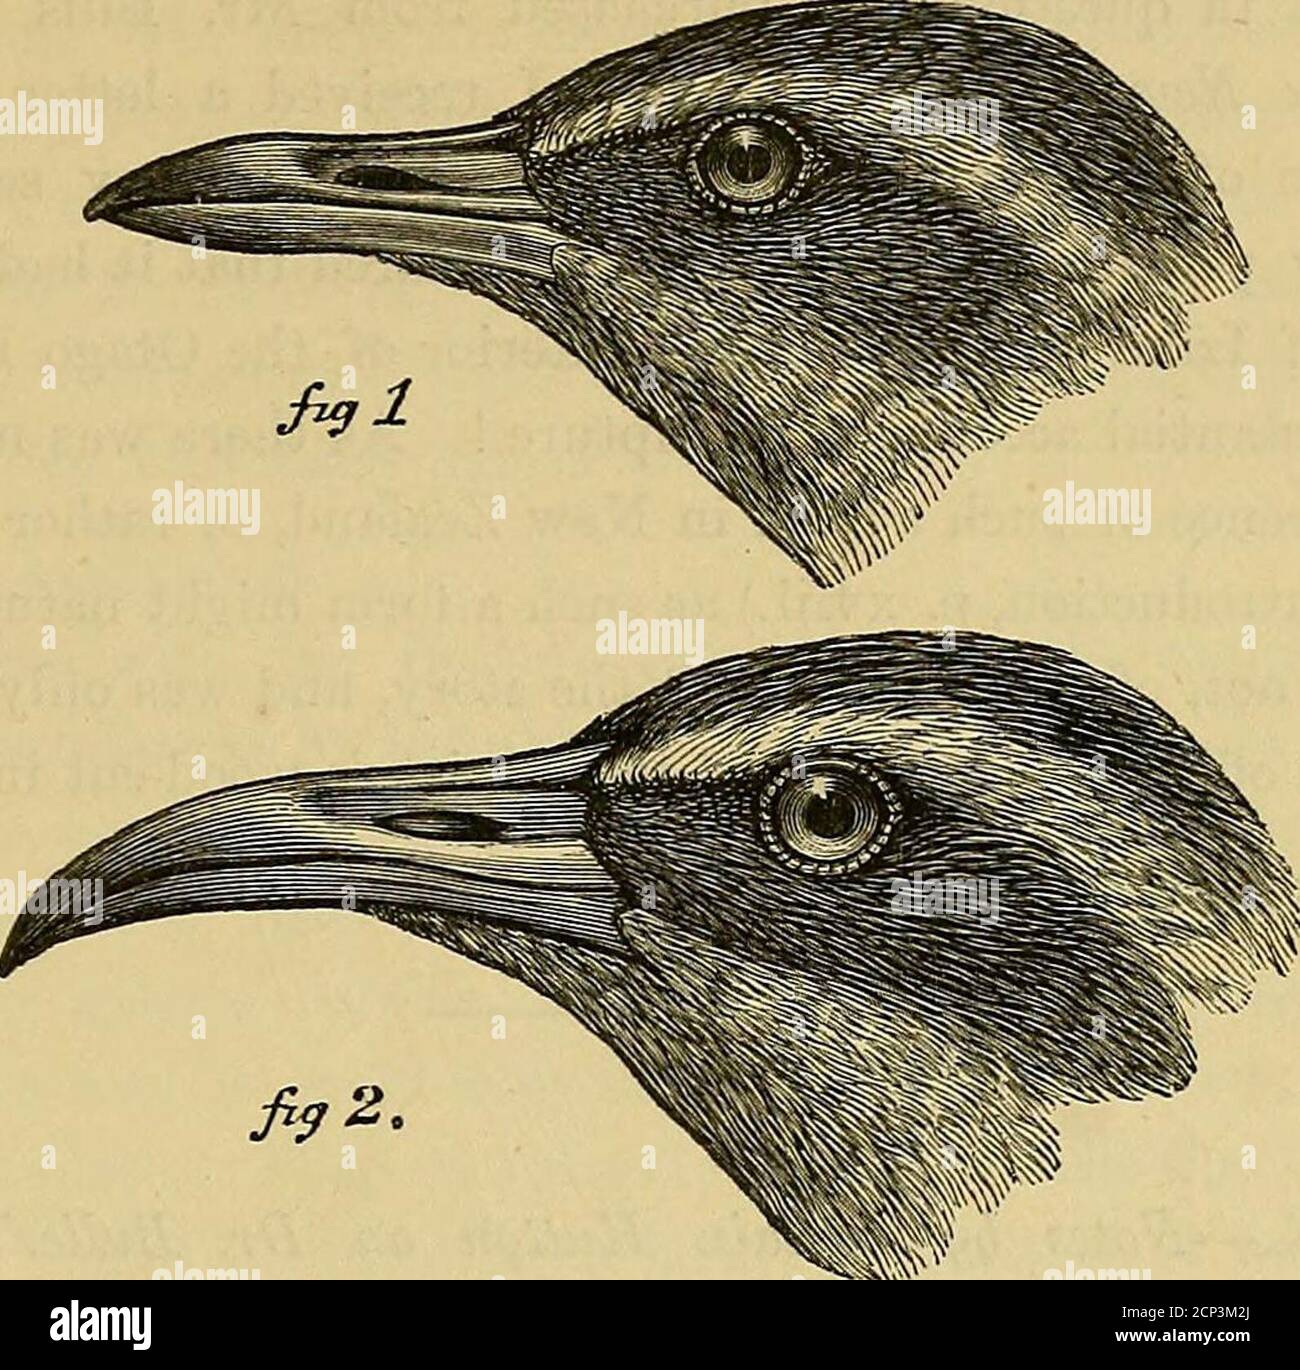 . Transactions and proceedings of the New Zealand Institute . o similar are they that itappears to me doiibtful whether E. dieffenhachii should be retained as adistinct species. Starting, therefore, with the assumption that Eallusdiffenhachii and E. 2yhilippensis are the same—in which he is entirely wrong—he proceeds to prove that Eallus modestus belongs to a different sub-genusfrom Rallus philip&gt;pensis. He gives a figure to show that the bill ofE. modestus is much more slender and longer in proportion to the size of thebird than in E. philippensis and indicates other points of difference. Stock Photo